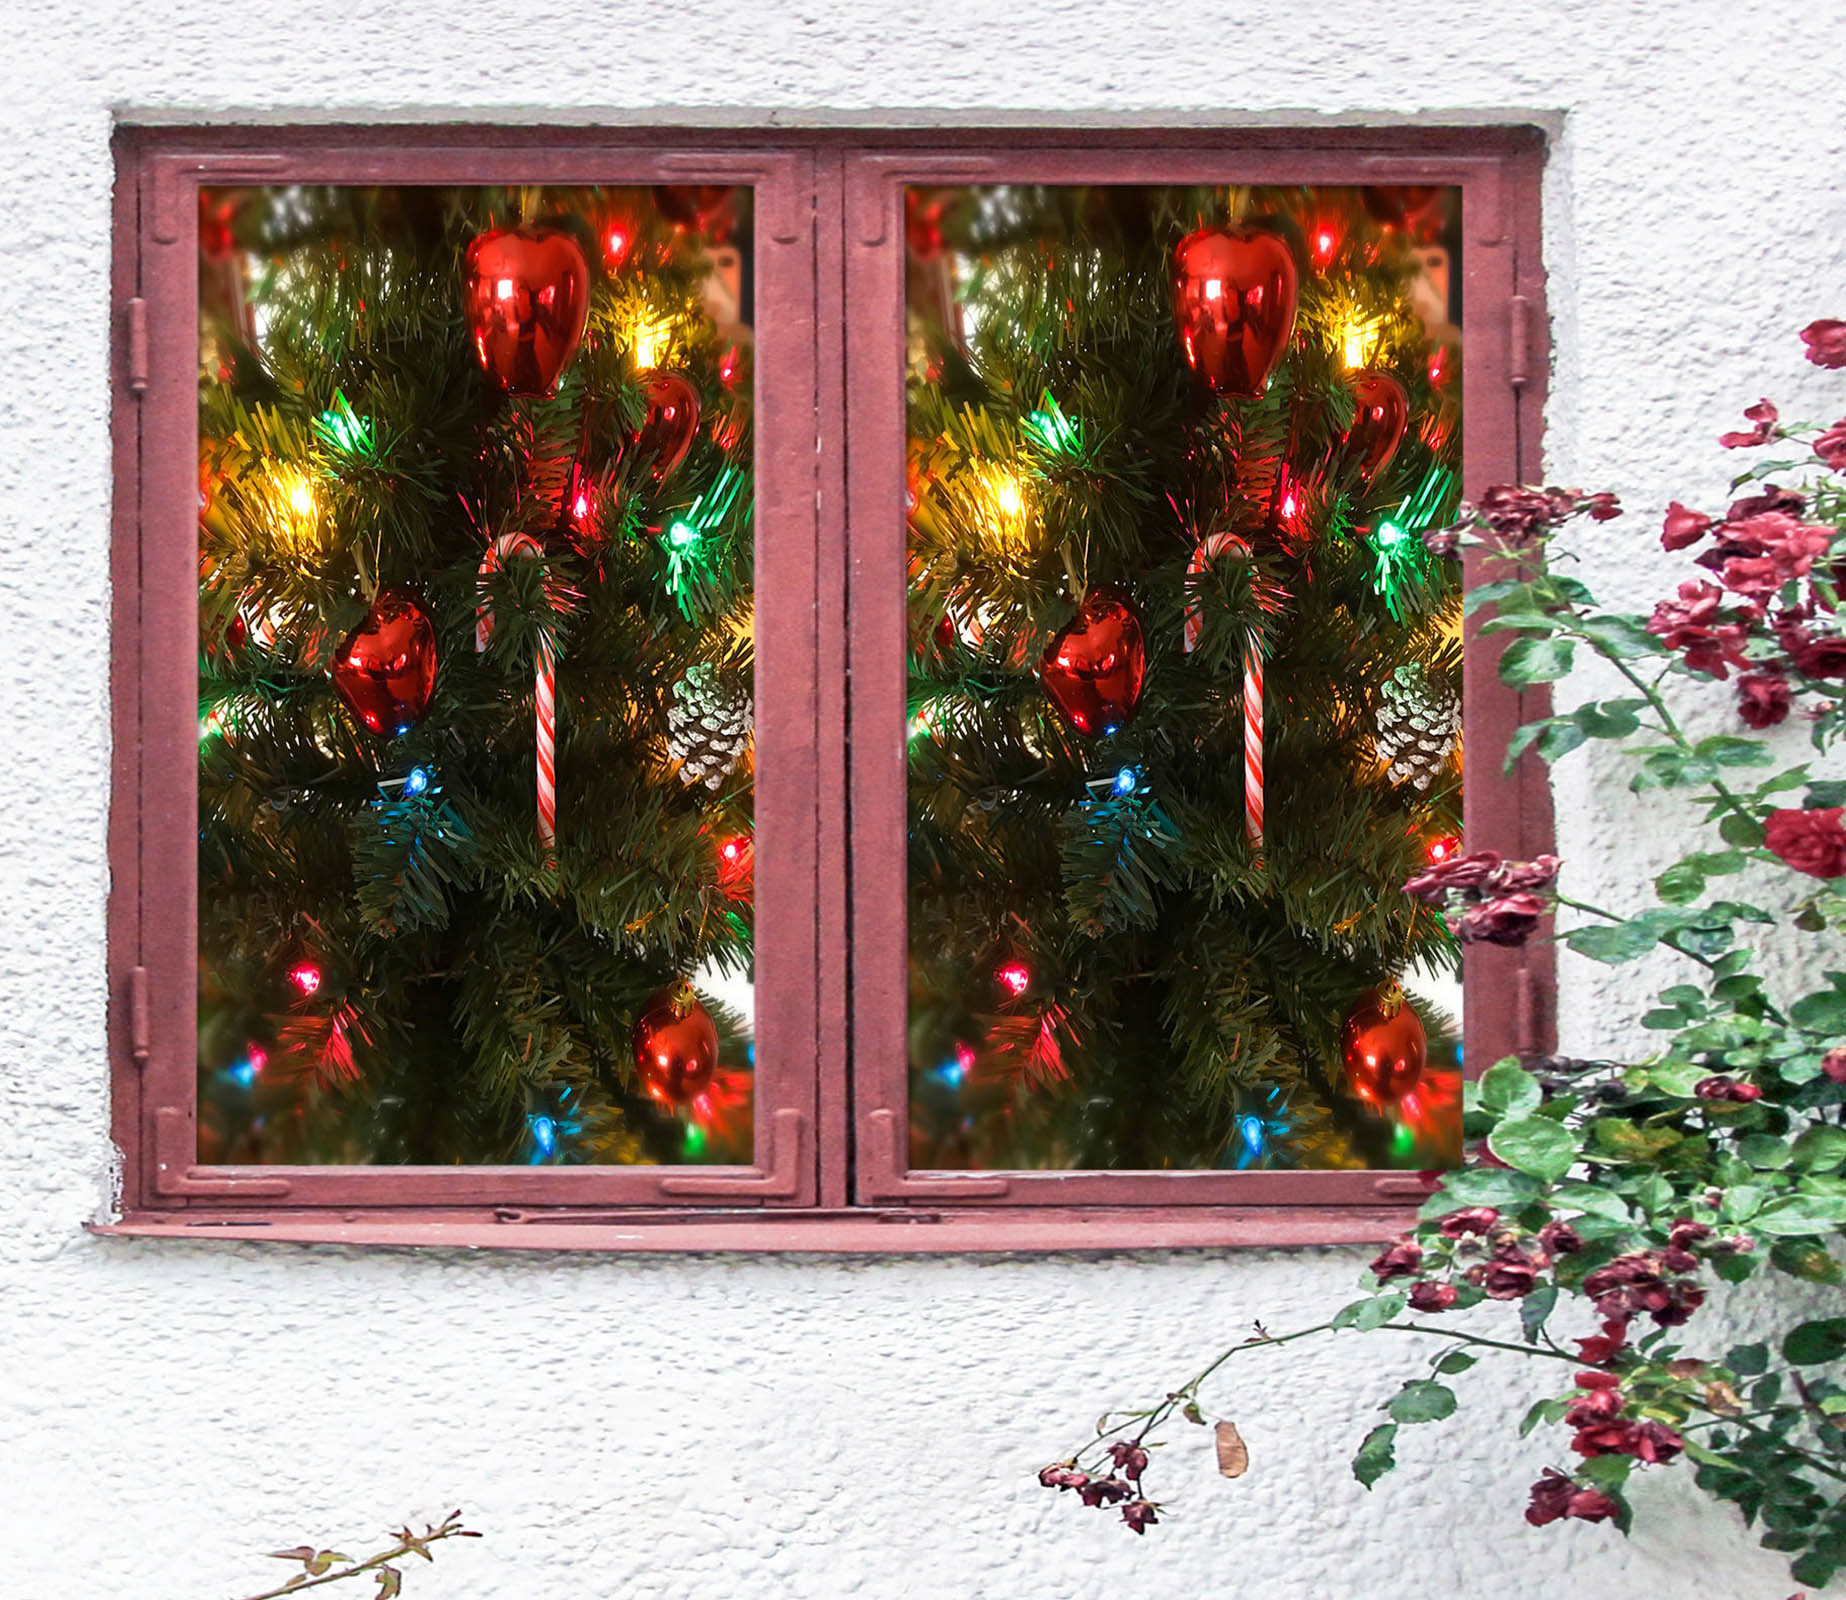 3D Christmas Ornaments 43049 Christmas Window Film Print Sticker Cling Stained Glass Xmas